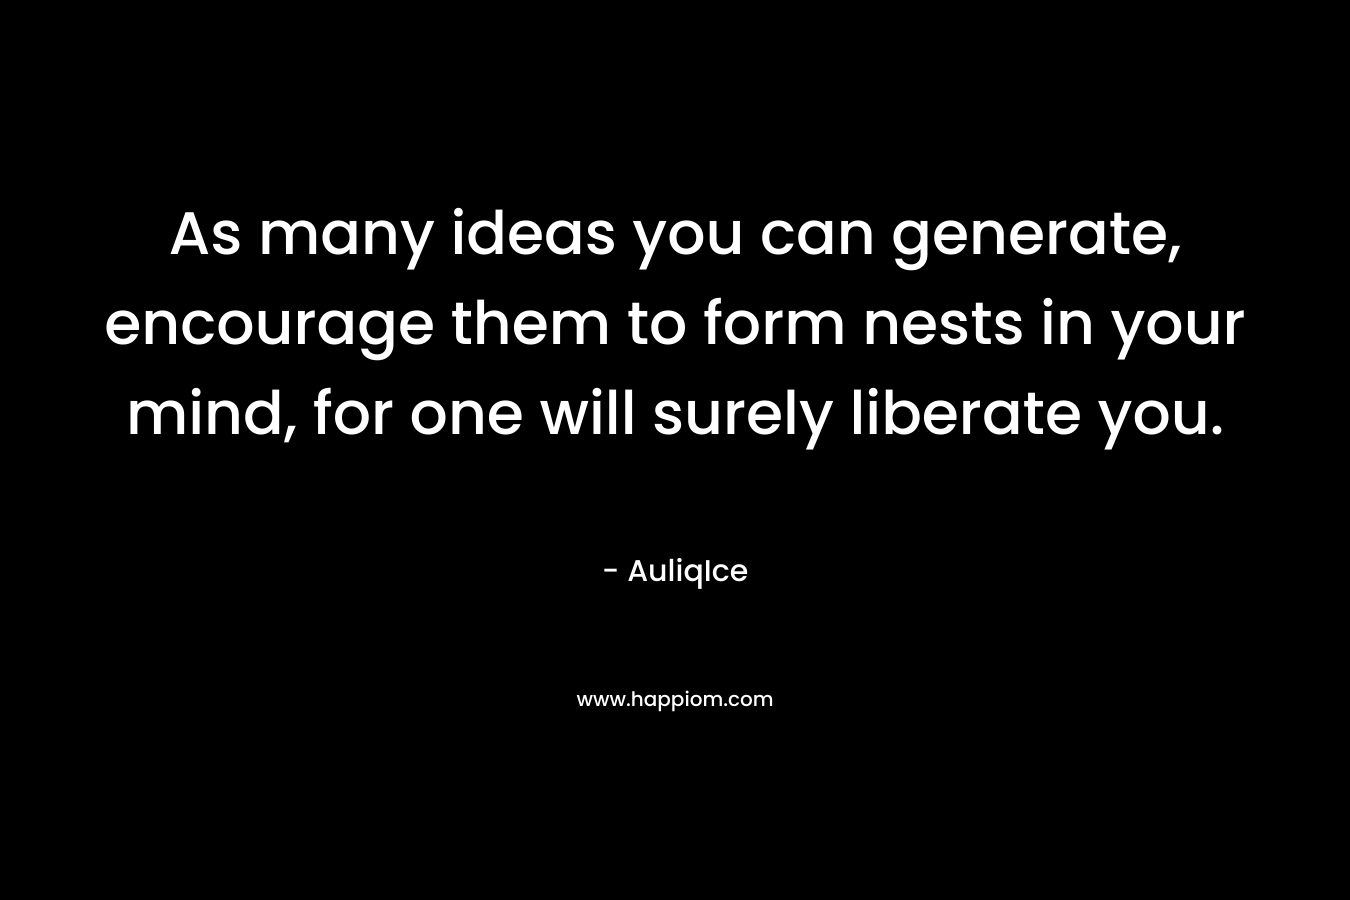 As many ideas you can generate, encourage them to form nests in your mind, for one will surely liberate you.